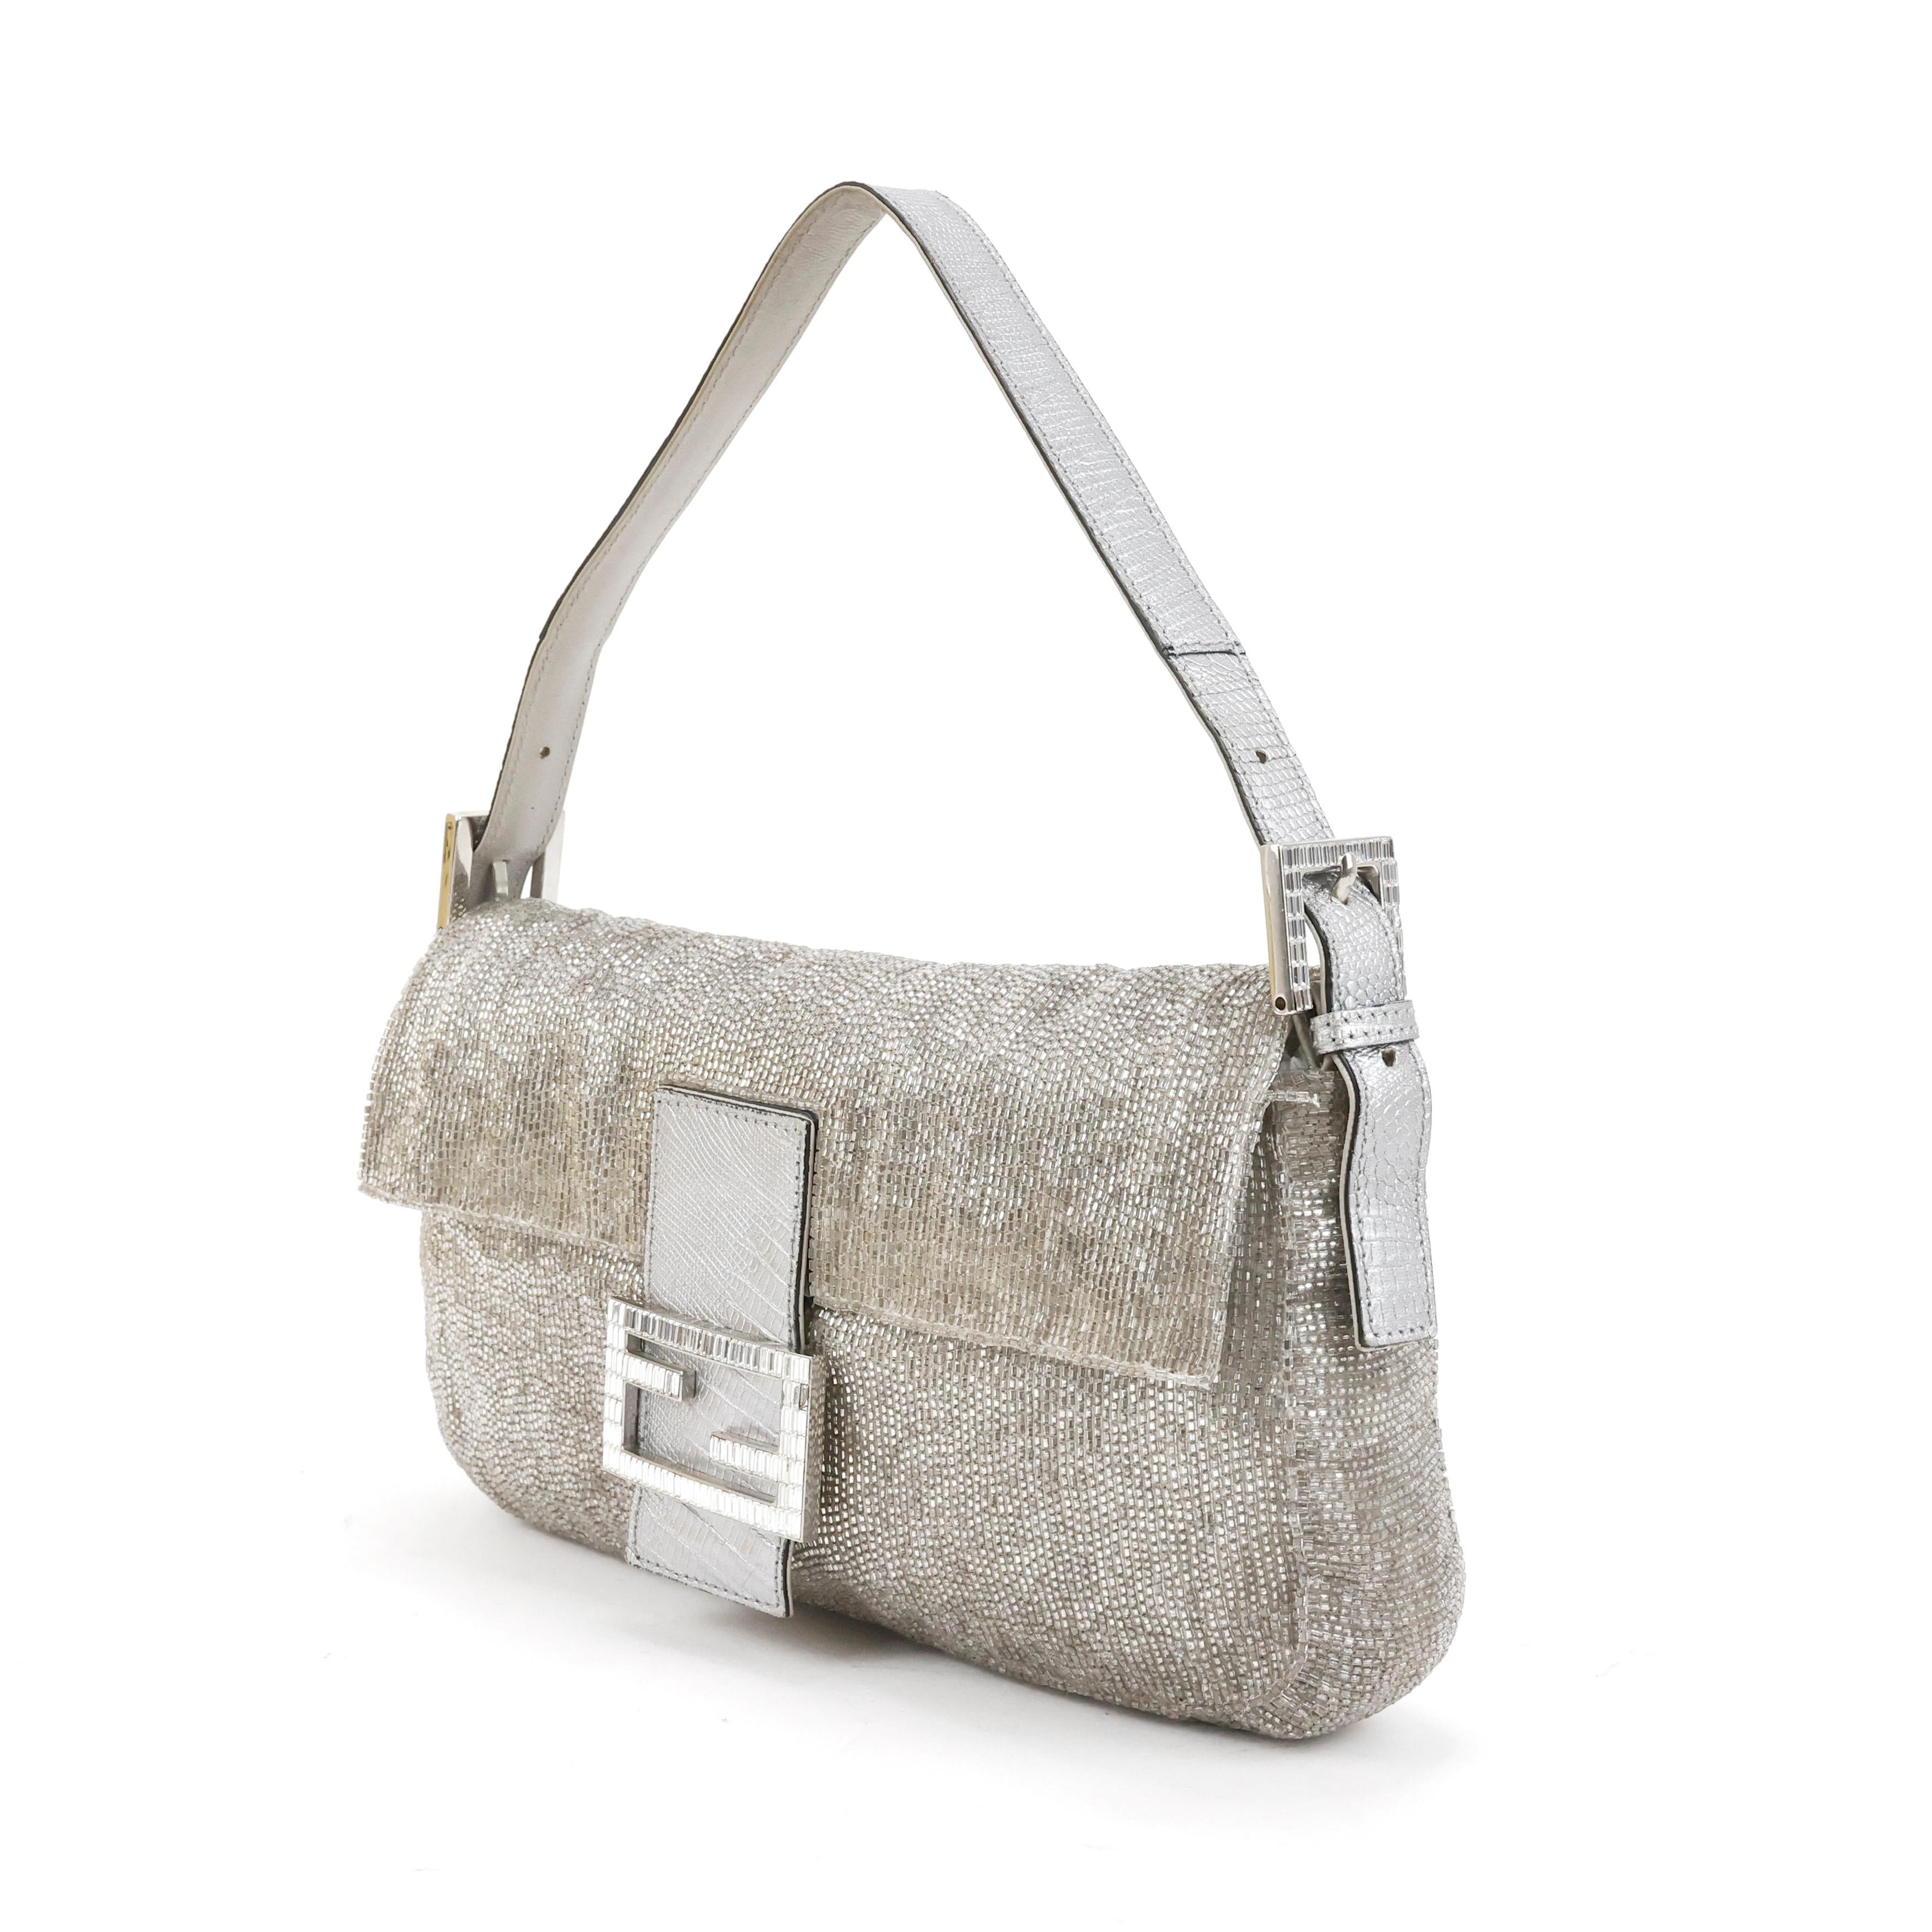 Rare Fendi Crystal Embellished Baguette with Lizard Leather For Sale 8